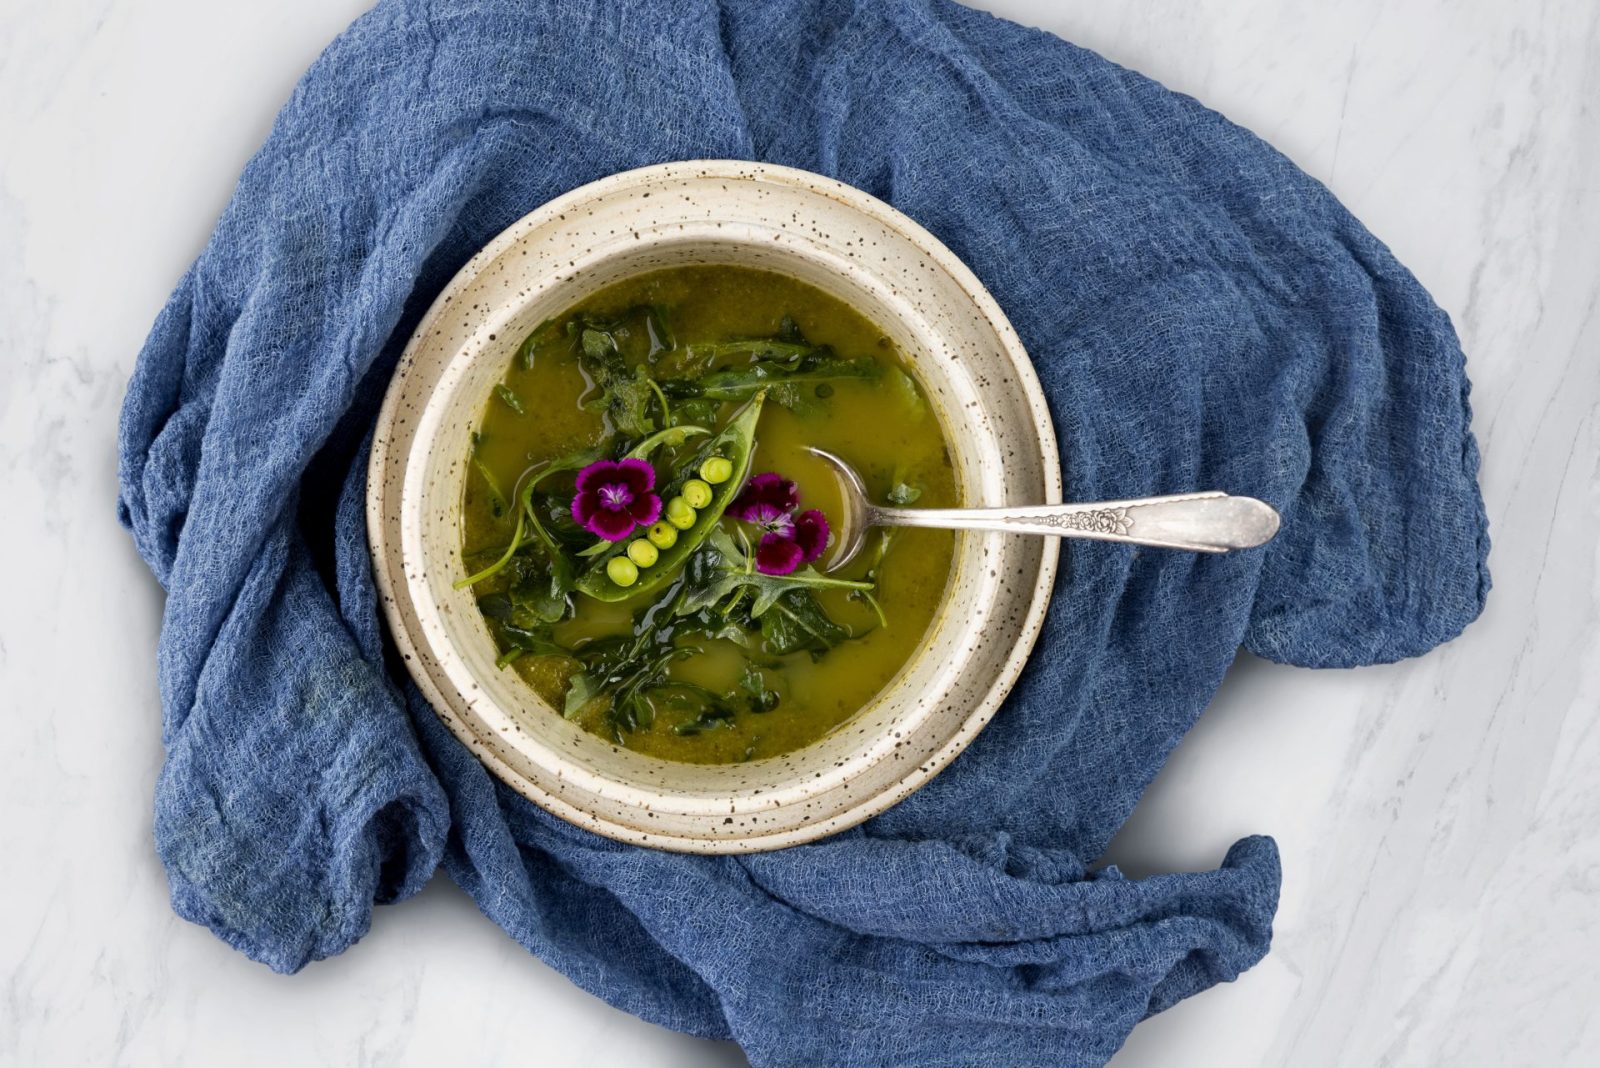 Introducing Spring Pea and Mint Soup